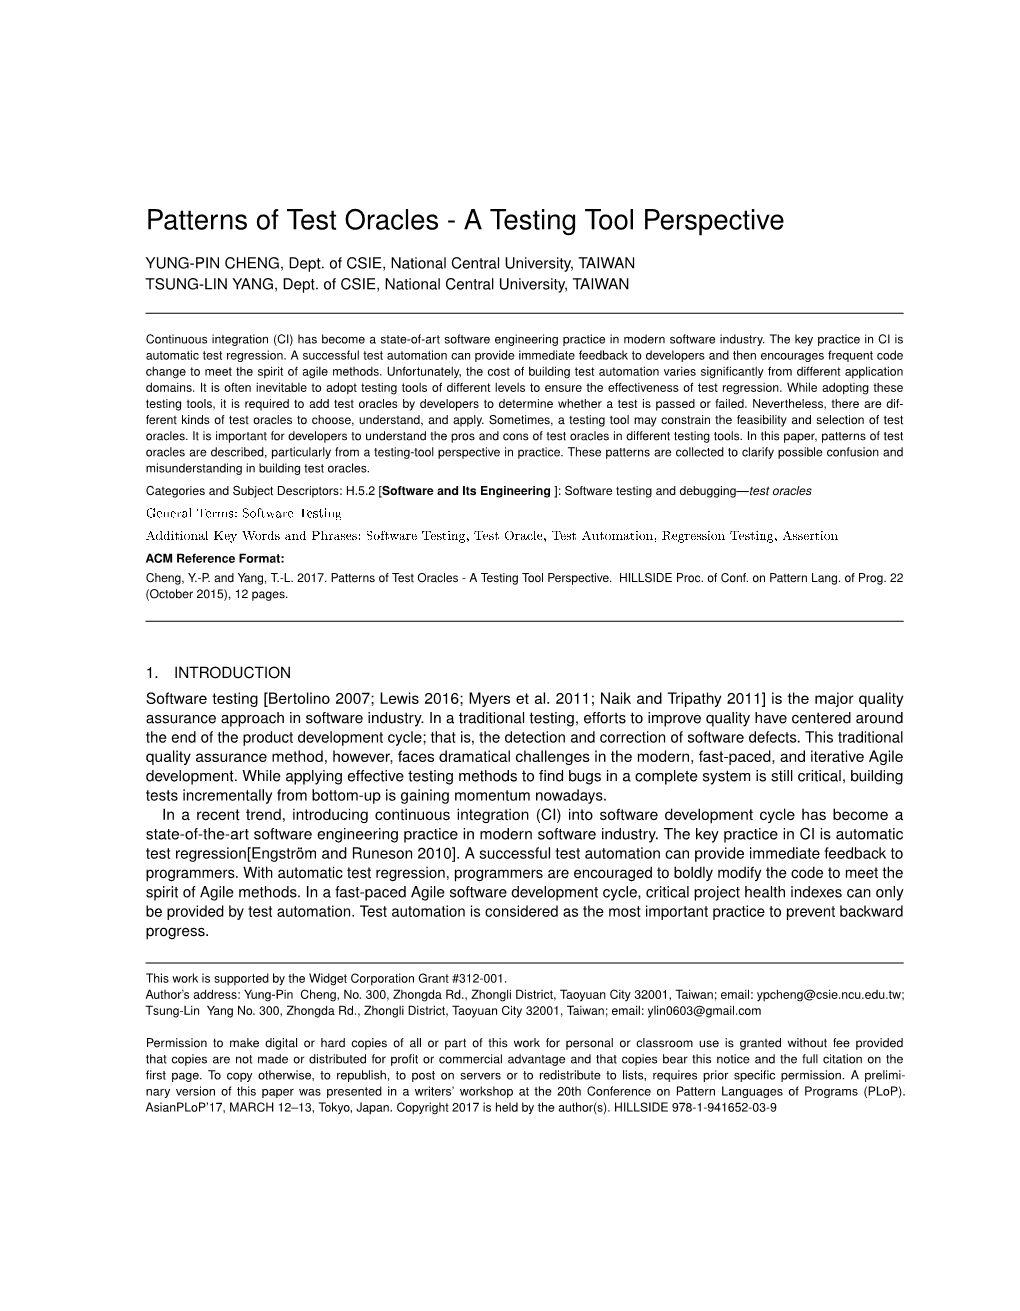 Patterns of Test Oracles - a Testing Tool Perspective